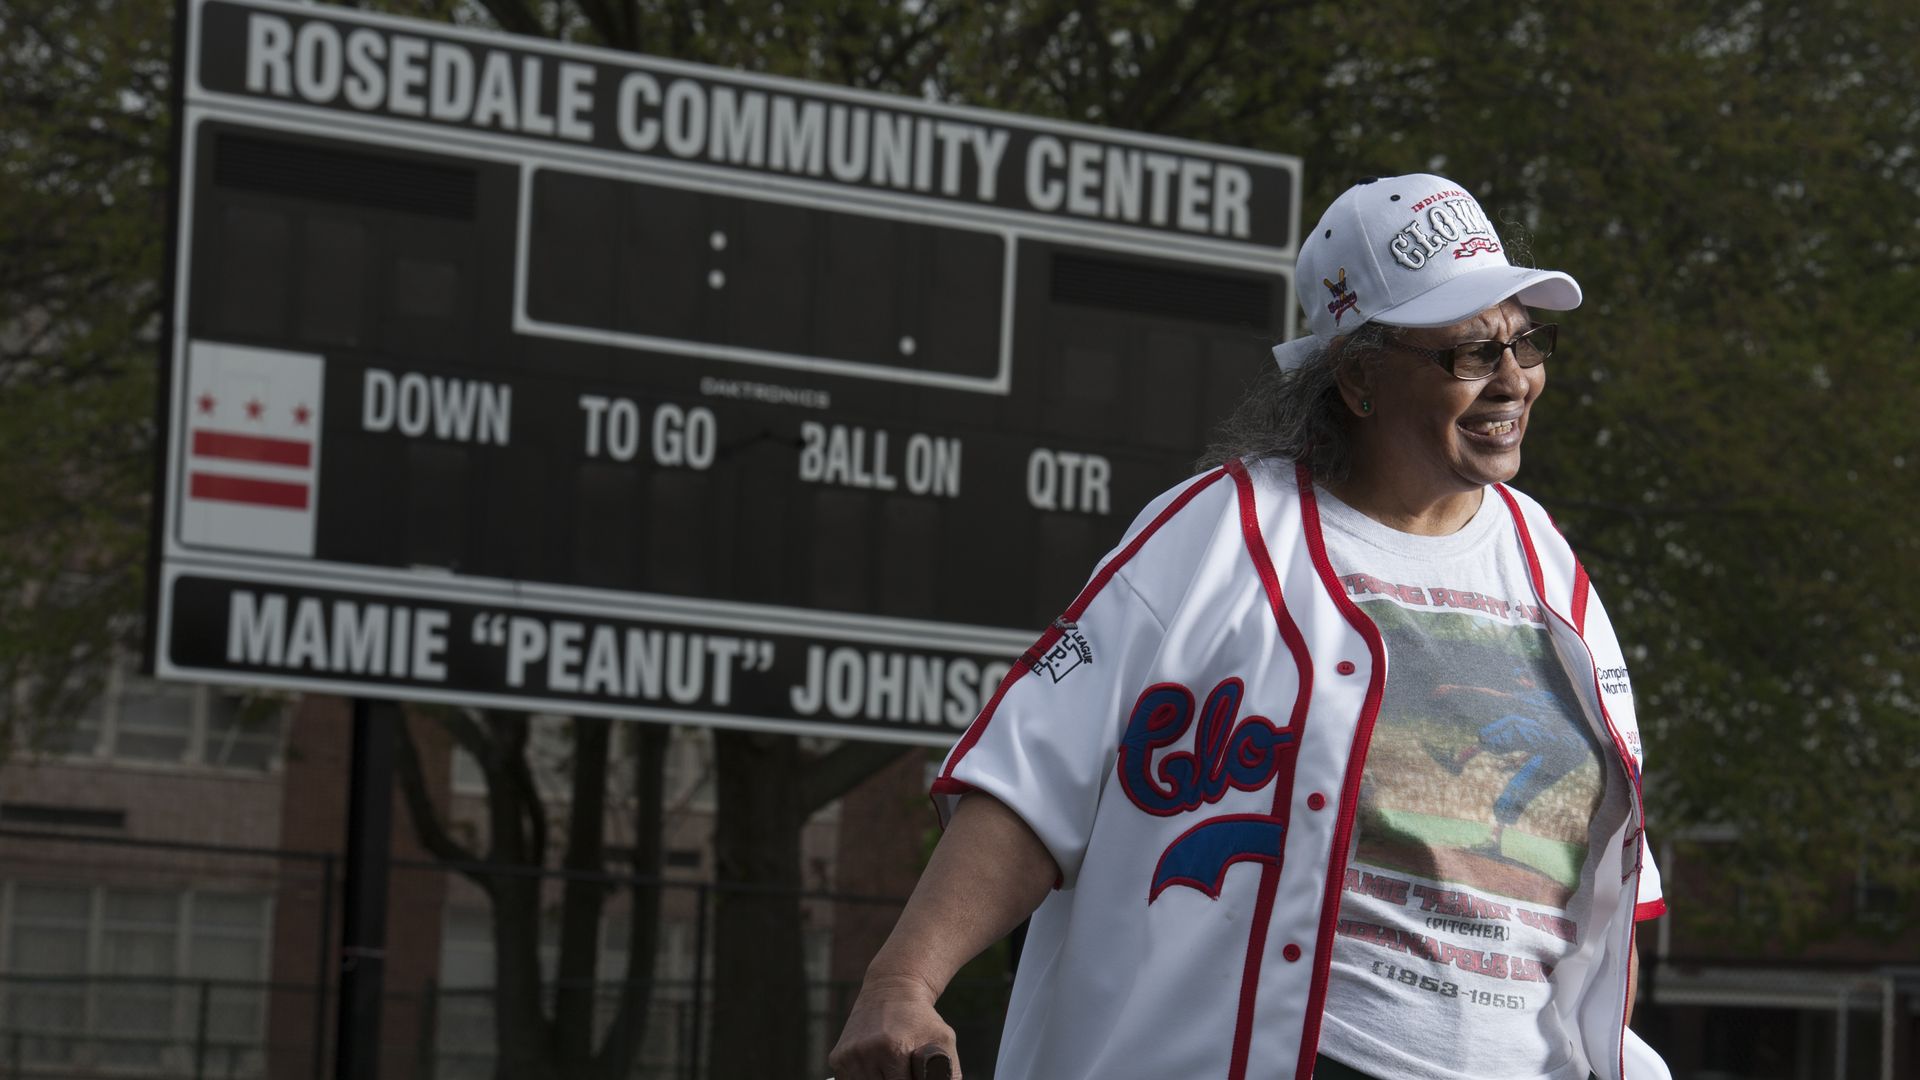 Mamie "Peanut" Johnson is photographed at a D.C. ball field named after her in 2013